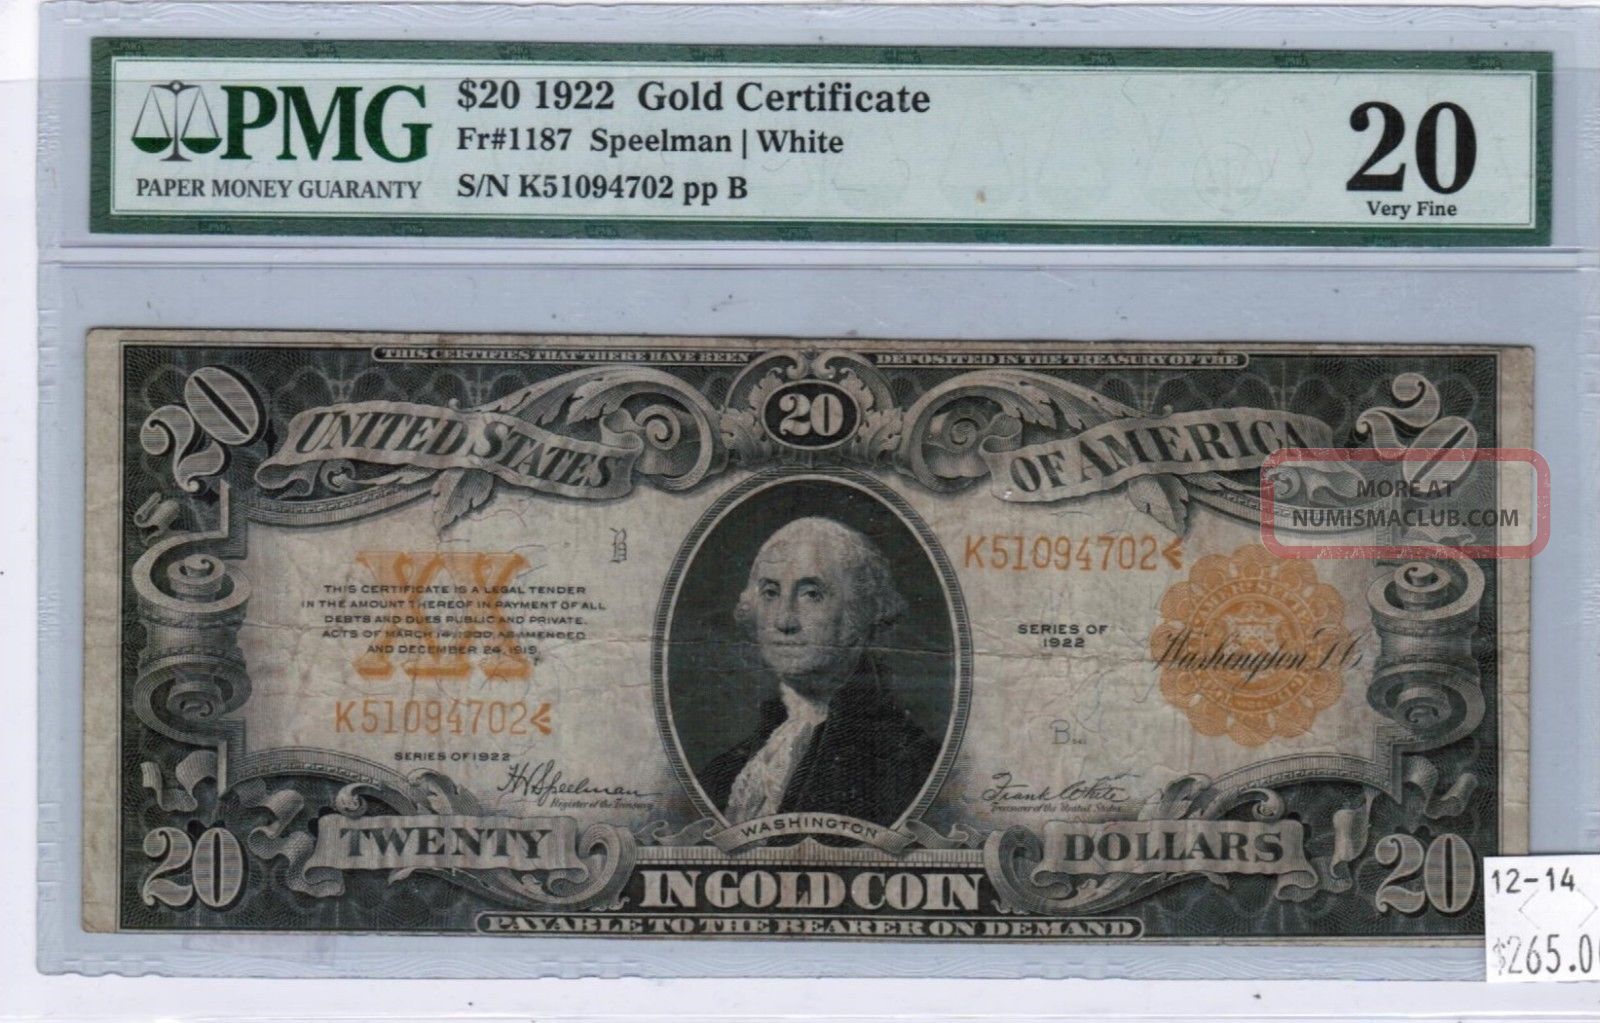 1922 $20 Gold Certificate - Pmg Vf 20 - Fr 1187 - Serial K51094702 Large Size Notes photo